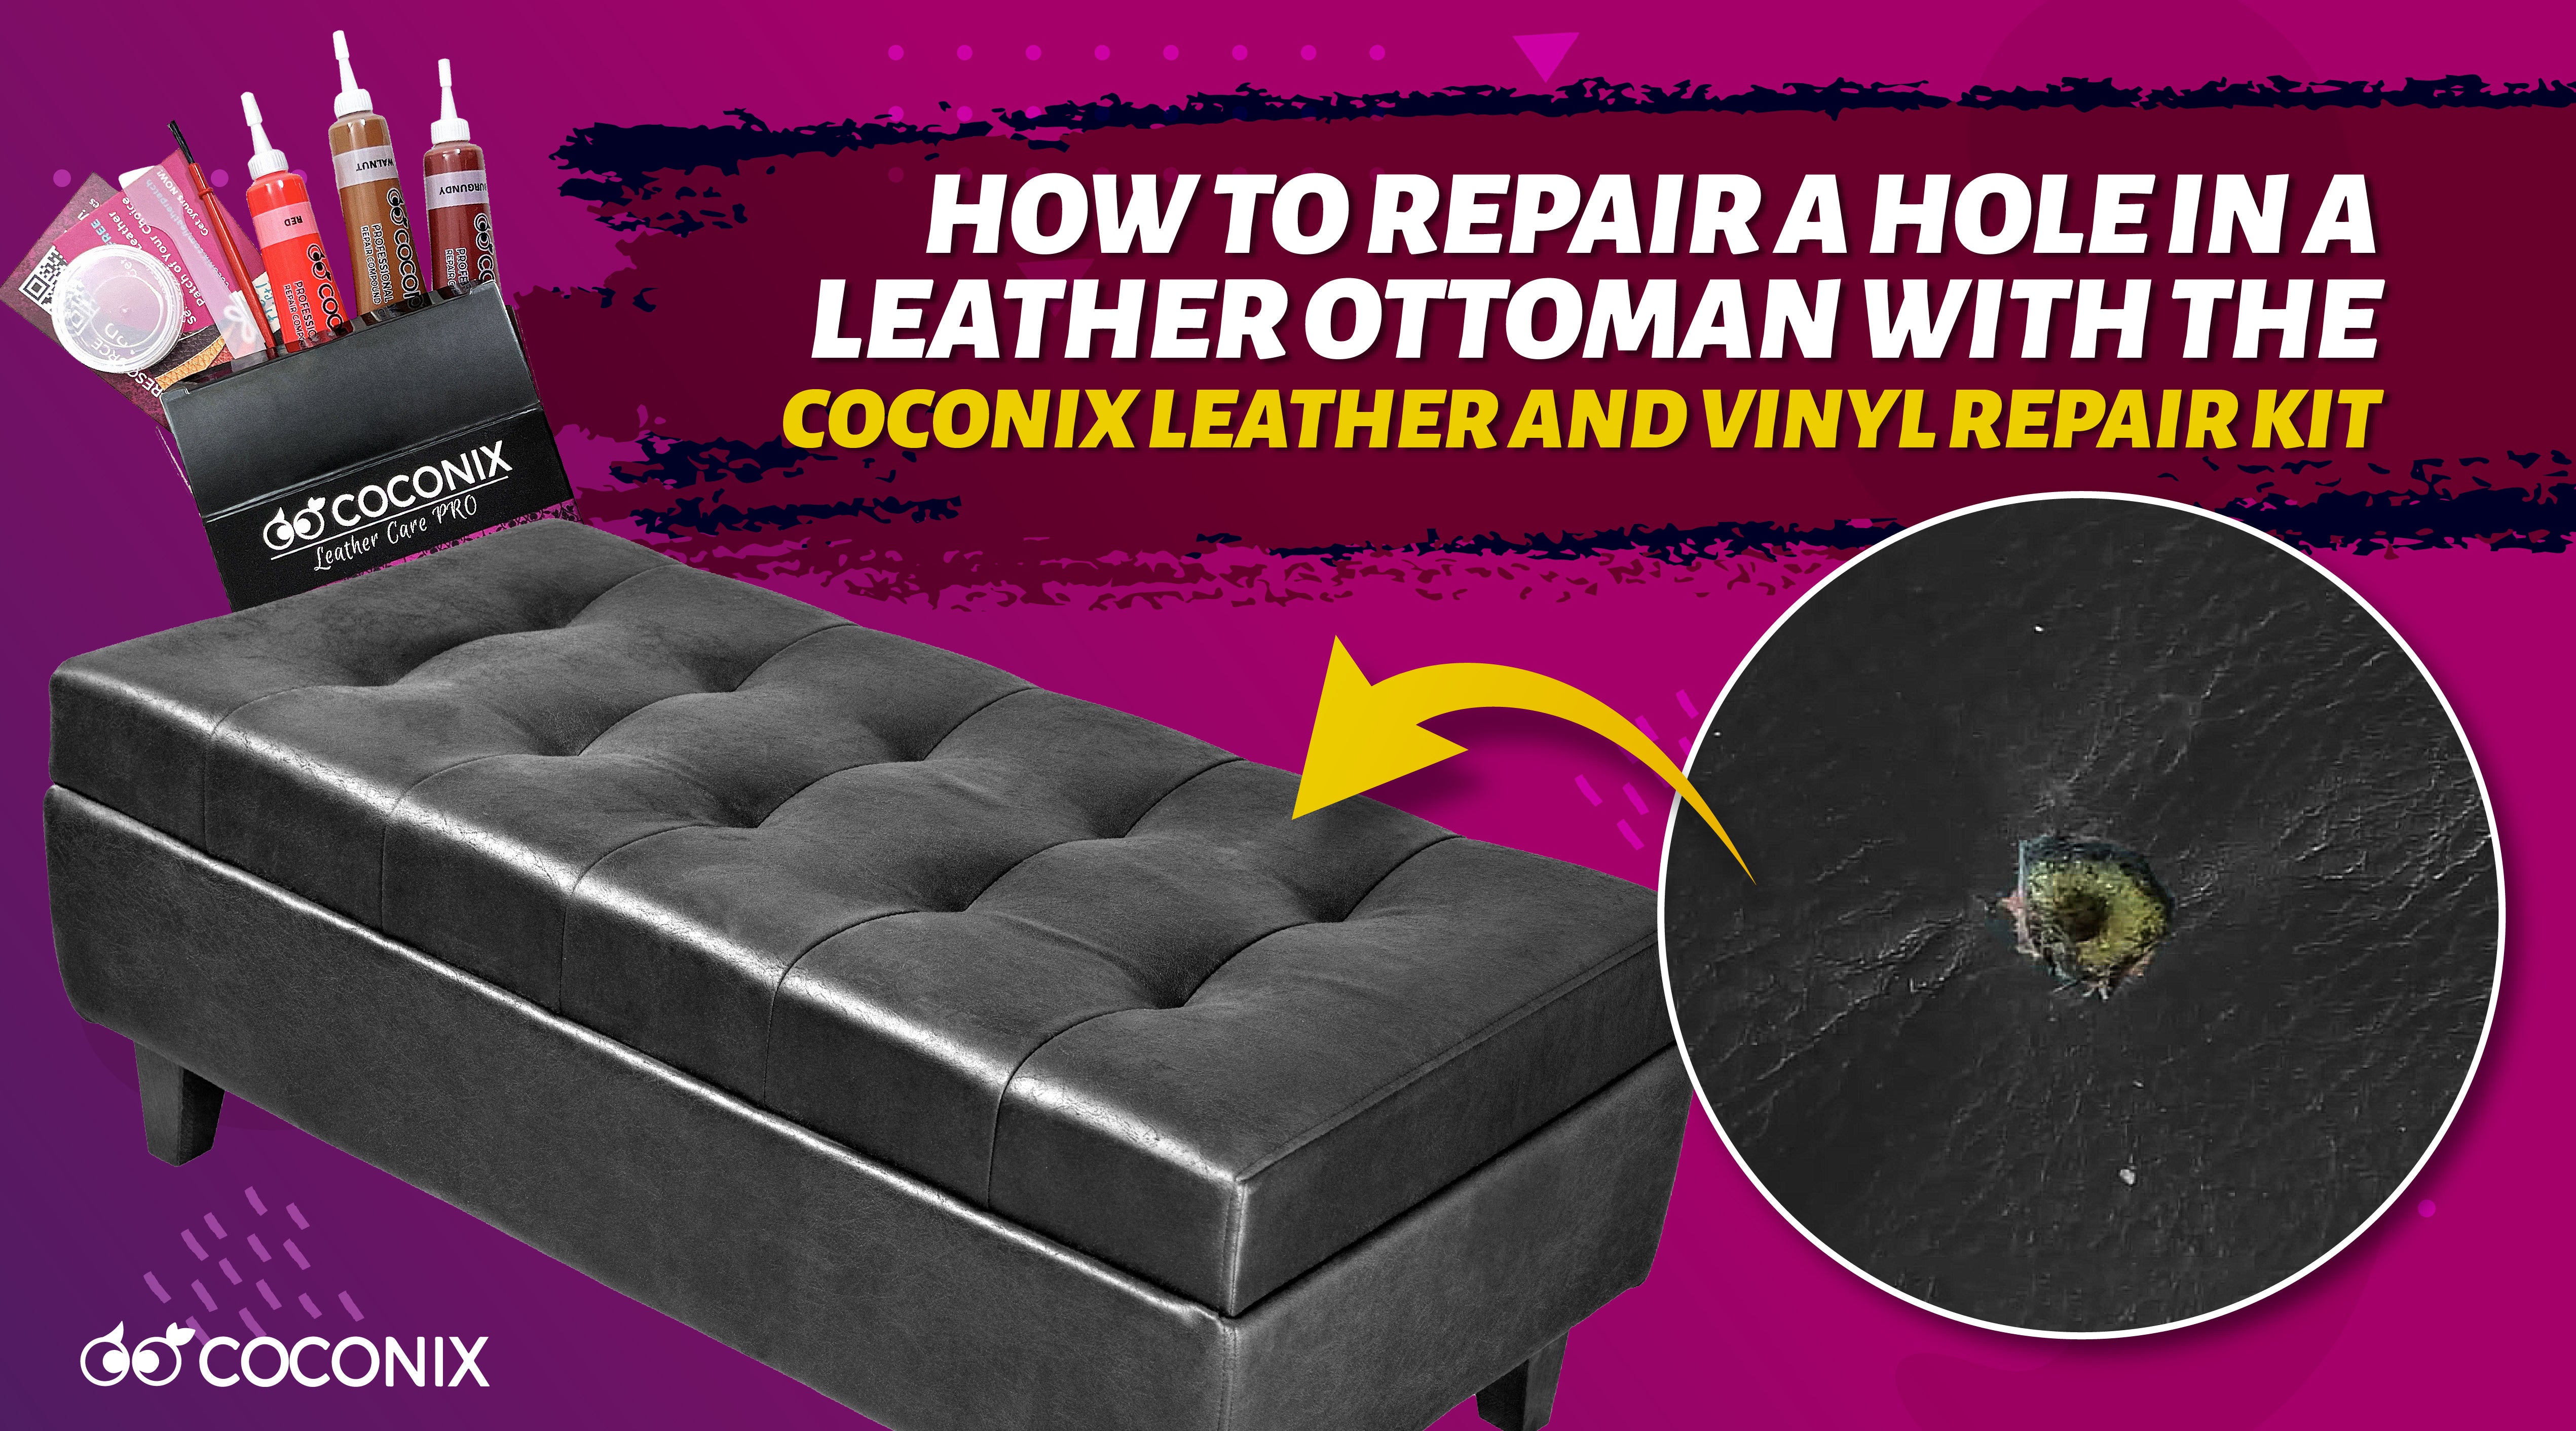 How to repair a hole in a leather ottoman with the Coconix Leather and